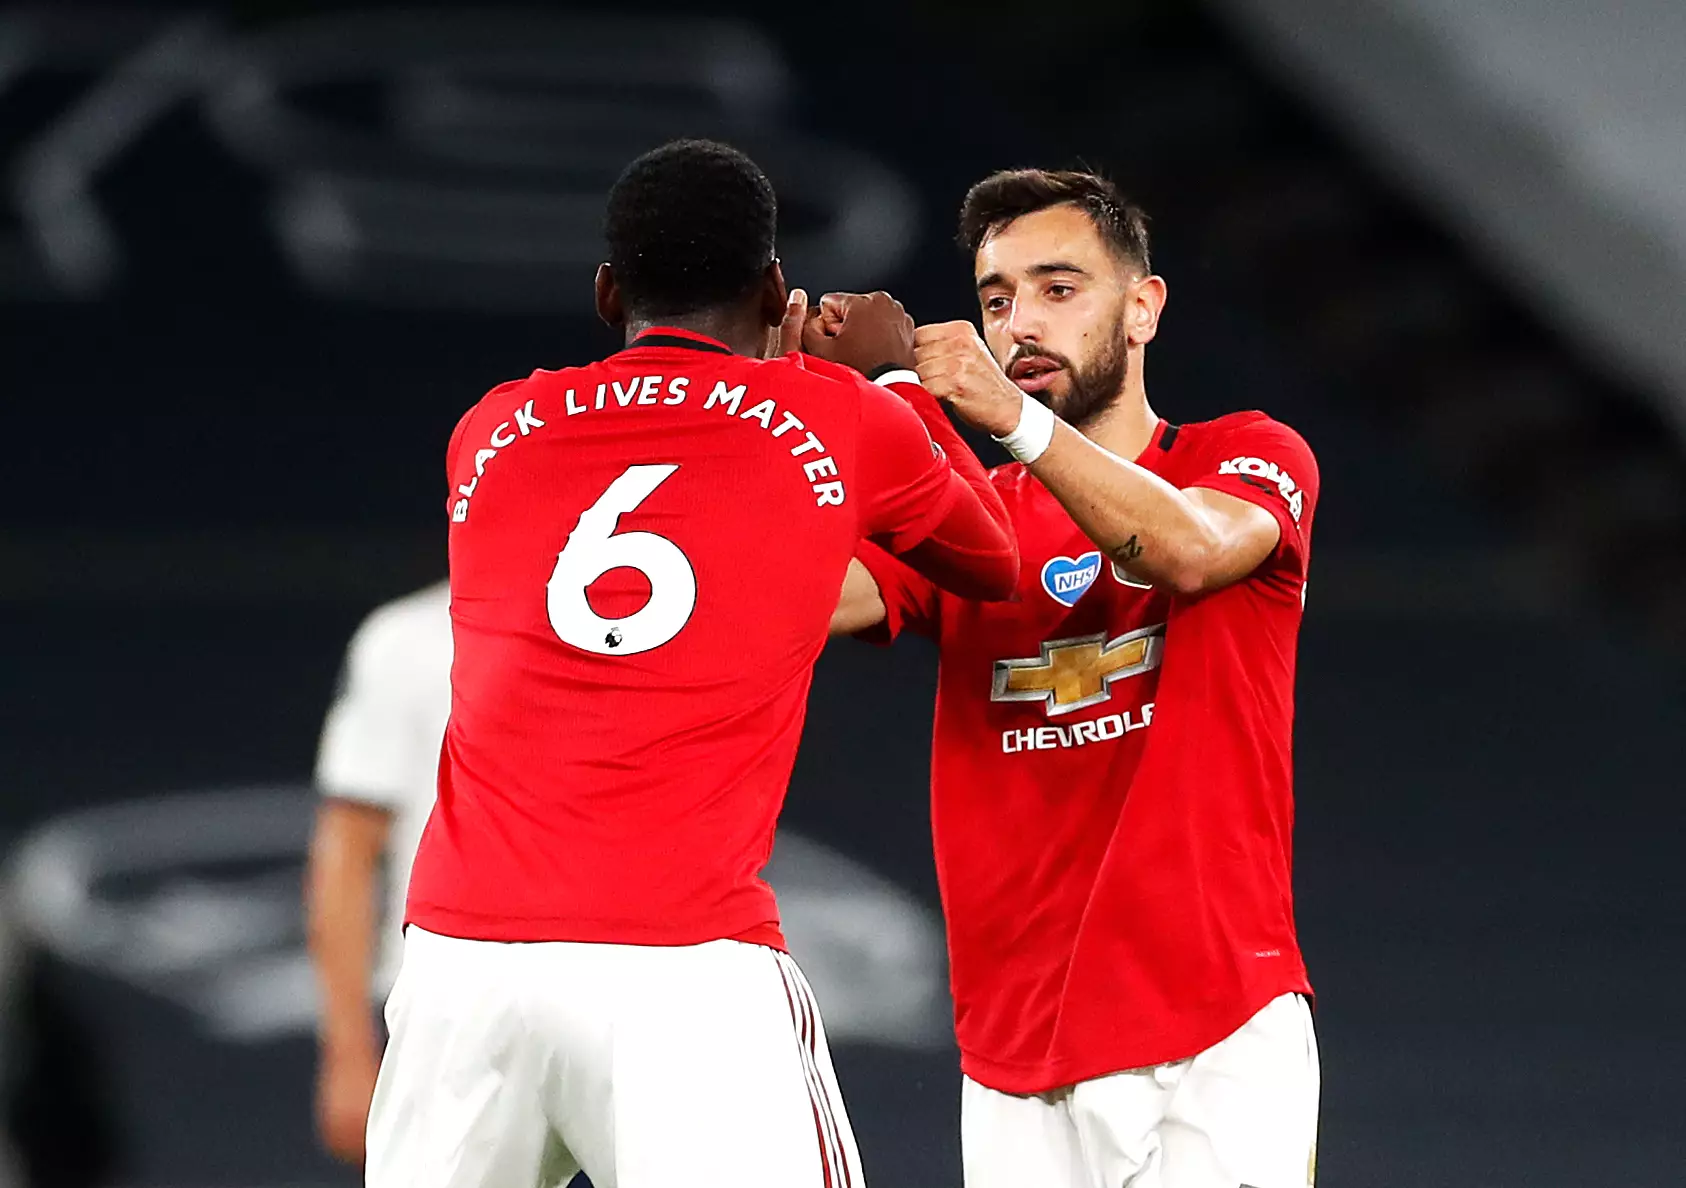 Pogba and Fernandes have a good partnership. Image: PA Images